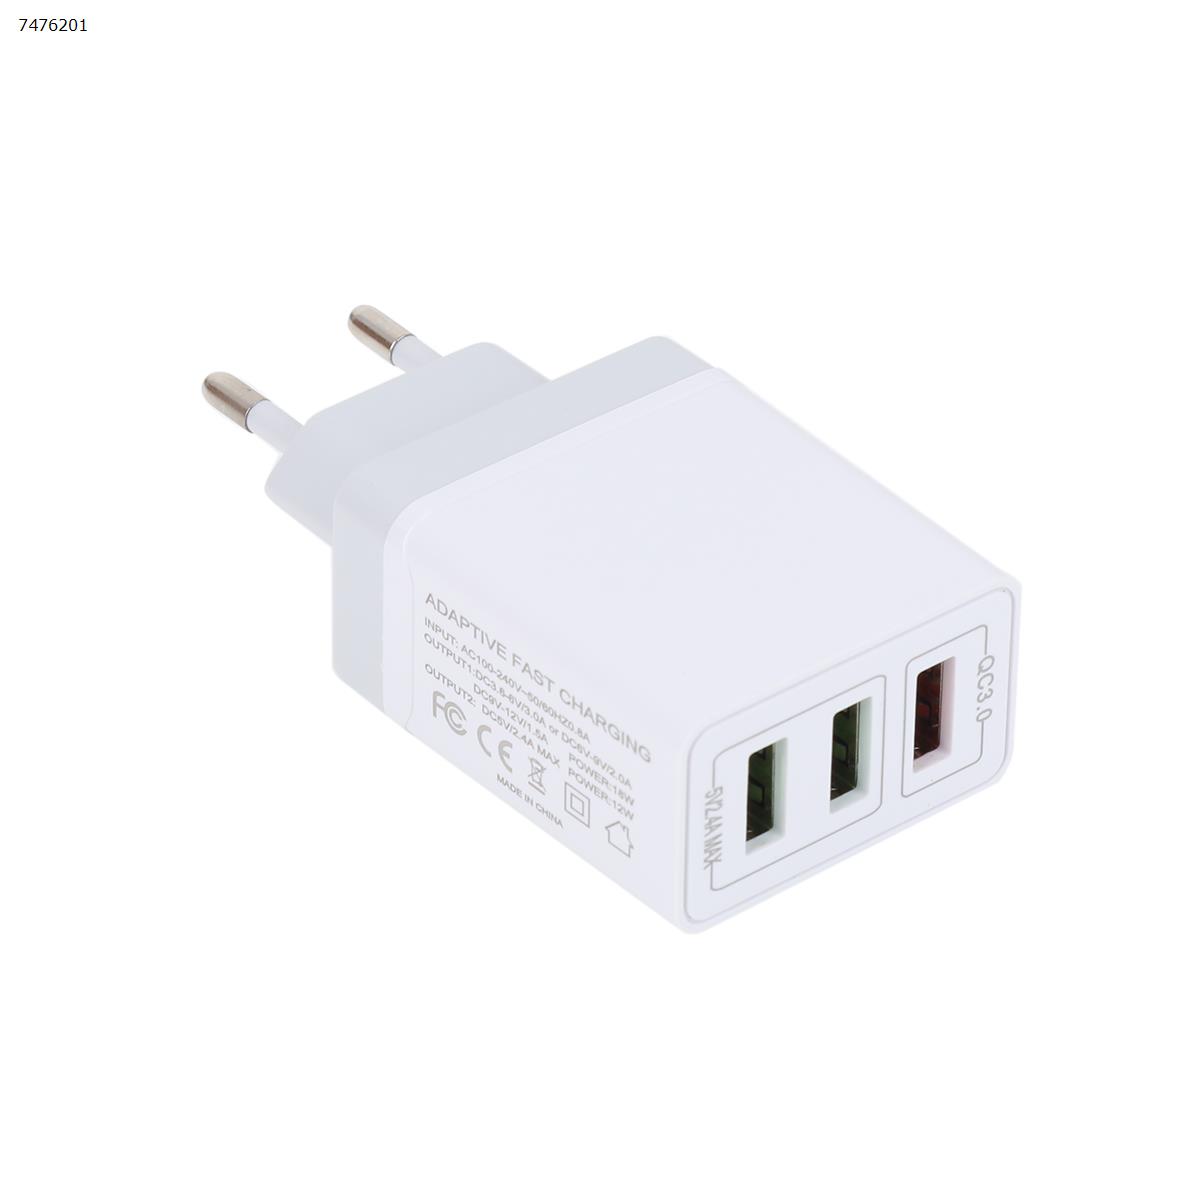 Quick Charge 3.0 USB Fast Wall Charger, 30W 3 Ports USB Travel Quick Charger Adapter QC 3.0 Fast Charging Block Plug suitable for iPhone, Samsung S9/S9+/S8/S7/S6 socket Charger Charger & Data Cable White EU